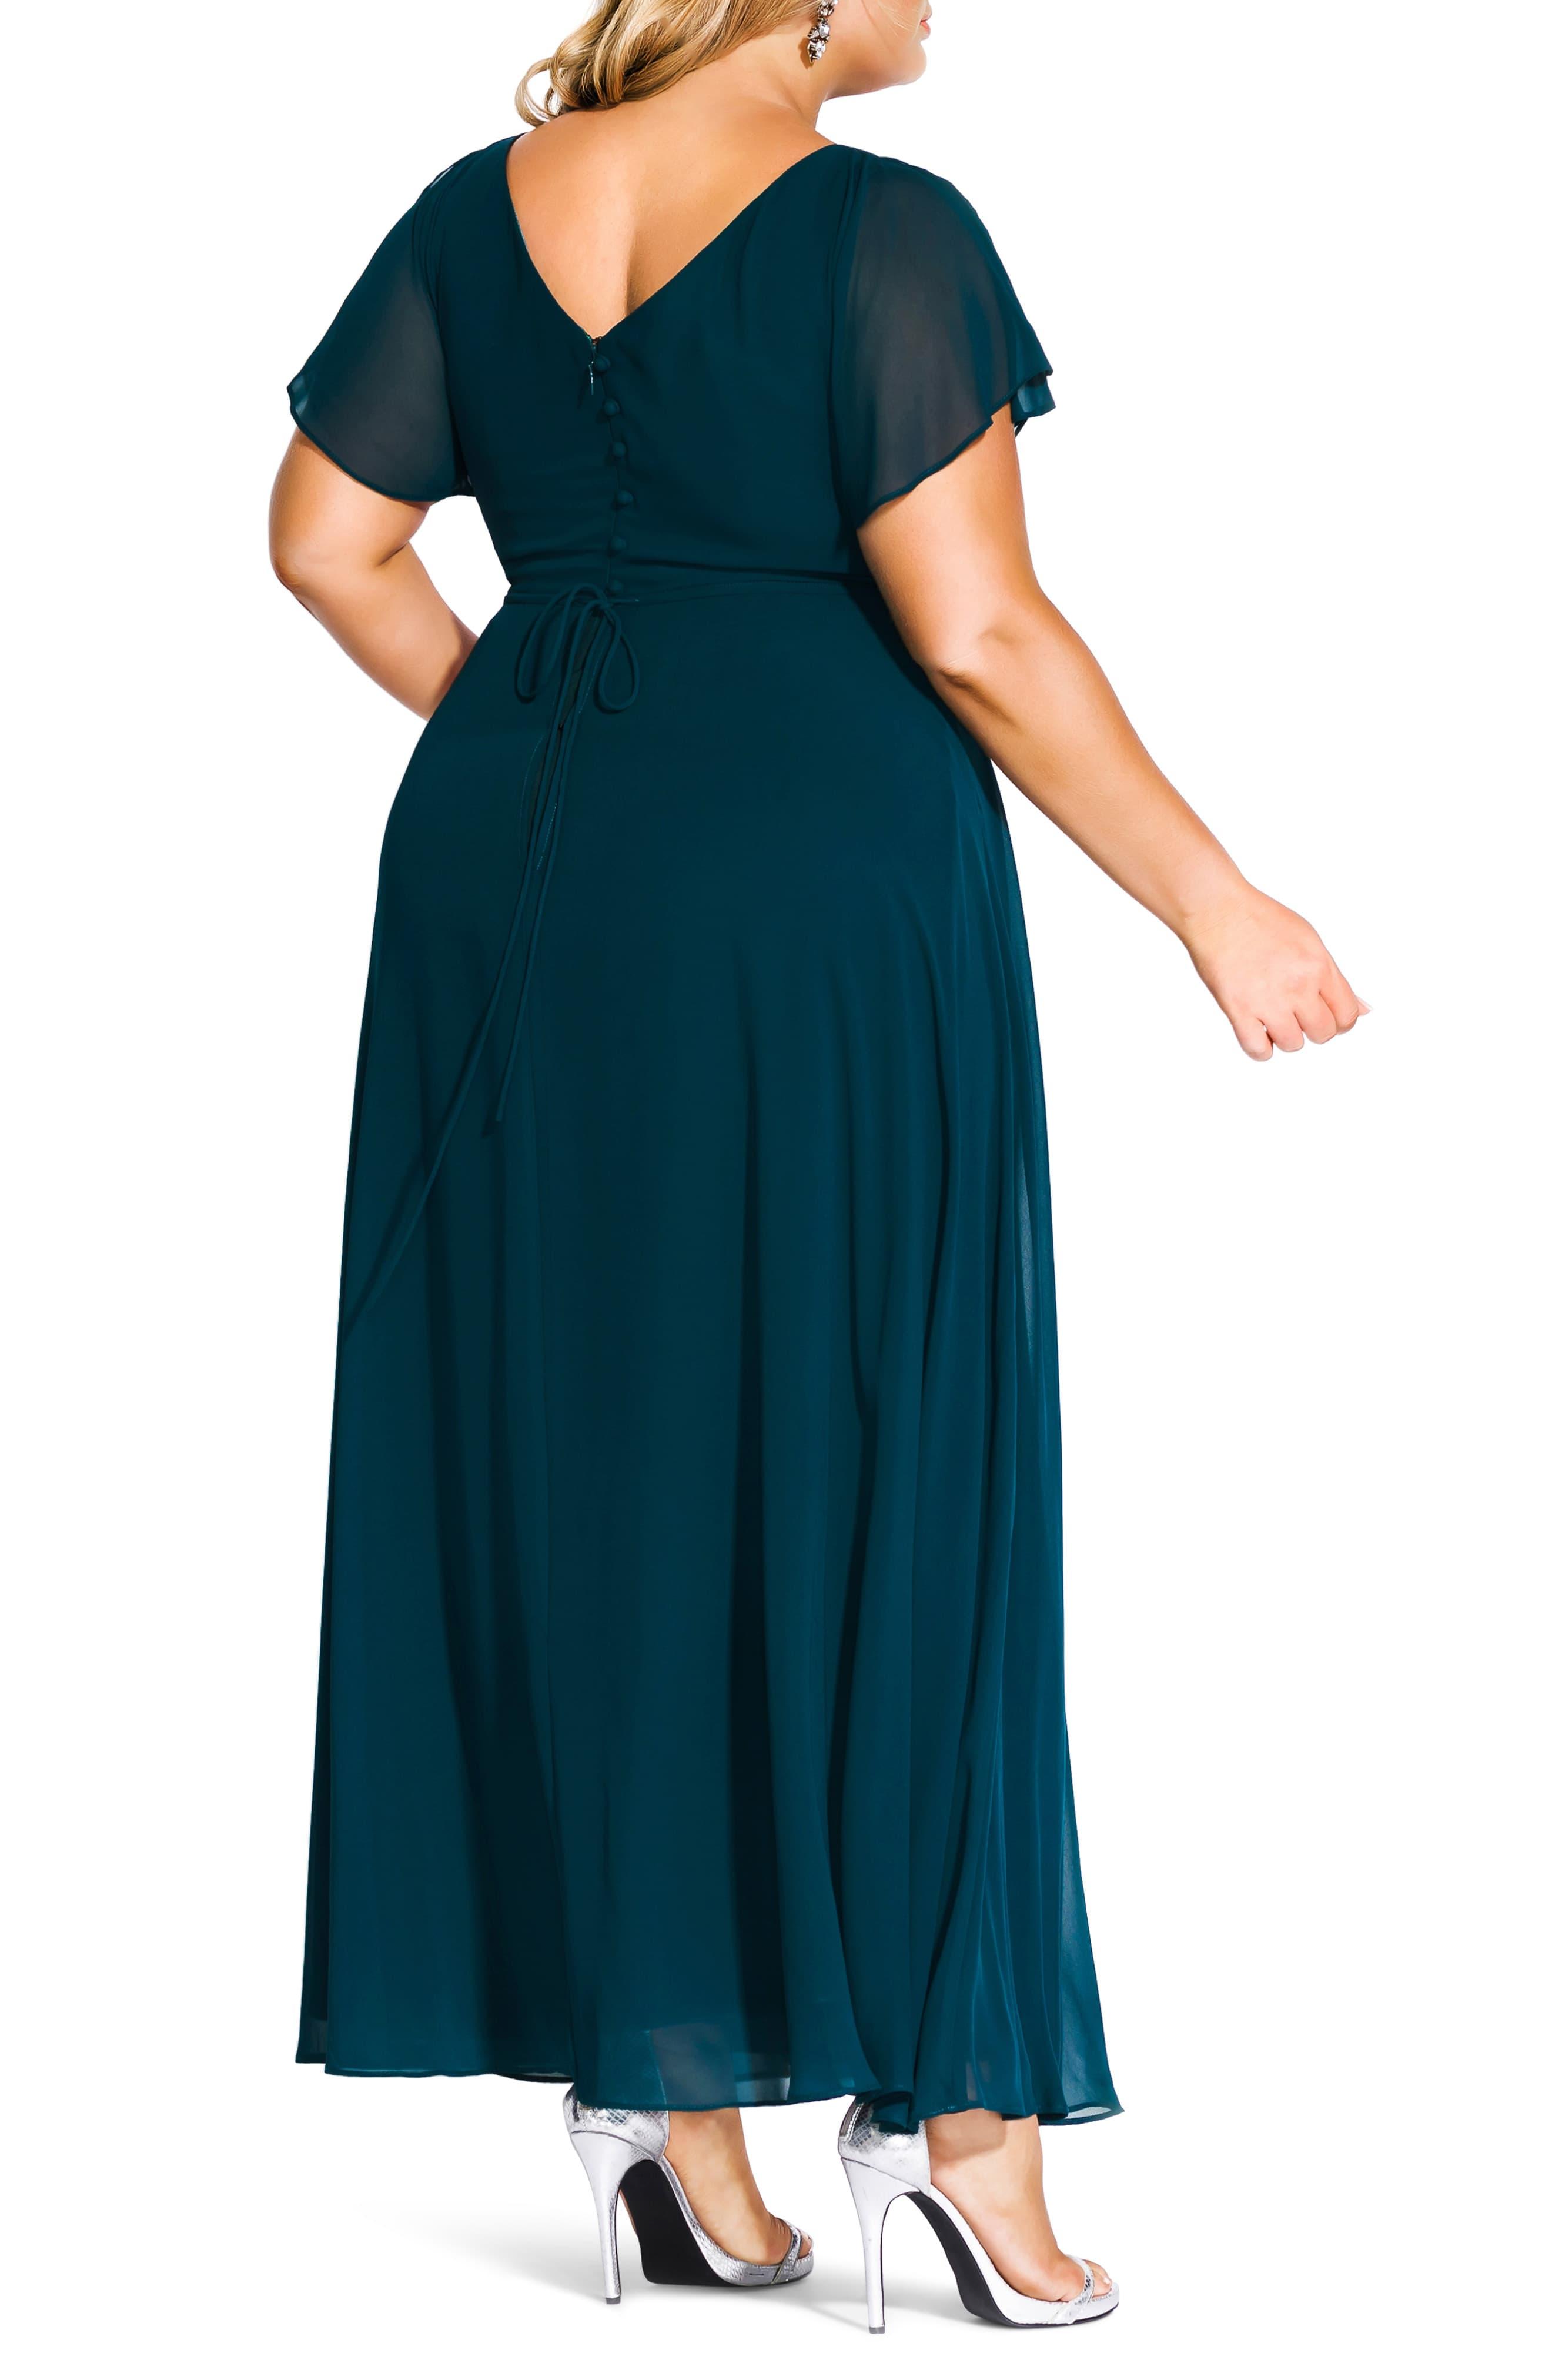 City Chic Sweet Wishes Maxi Dress in Emerald (Green) - Lyst